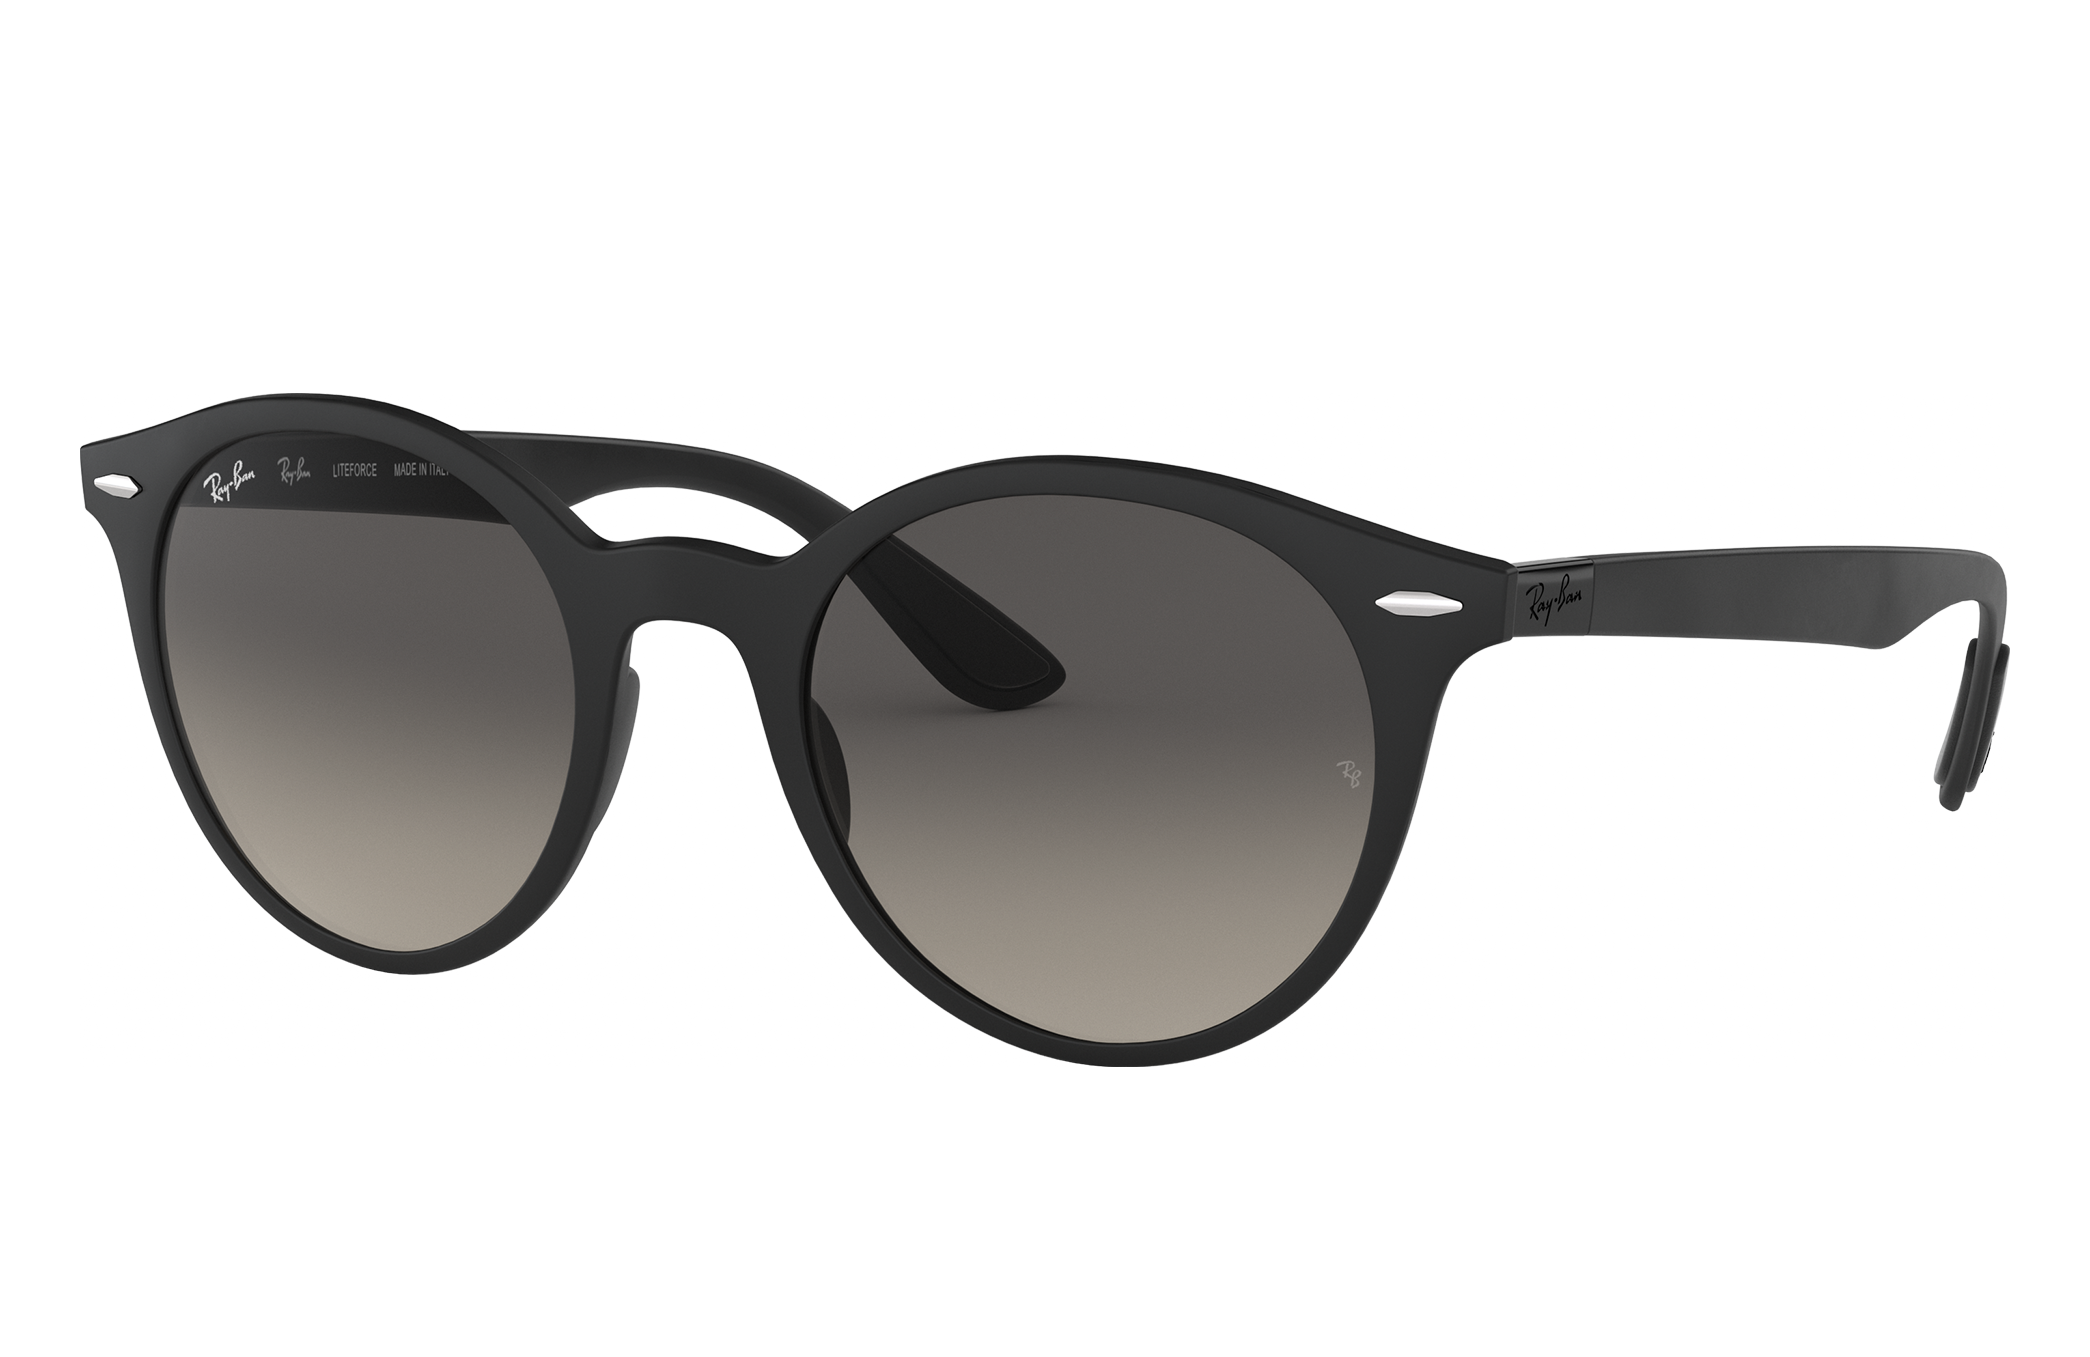 Rb4296 Sunglasses in Black and Grey - RB4296 | Ray-Ban®